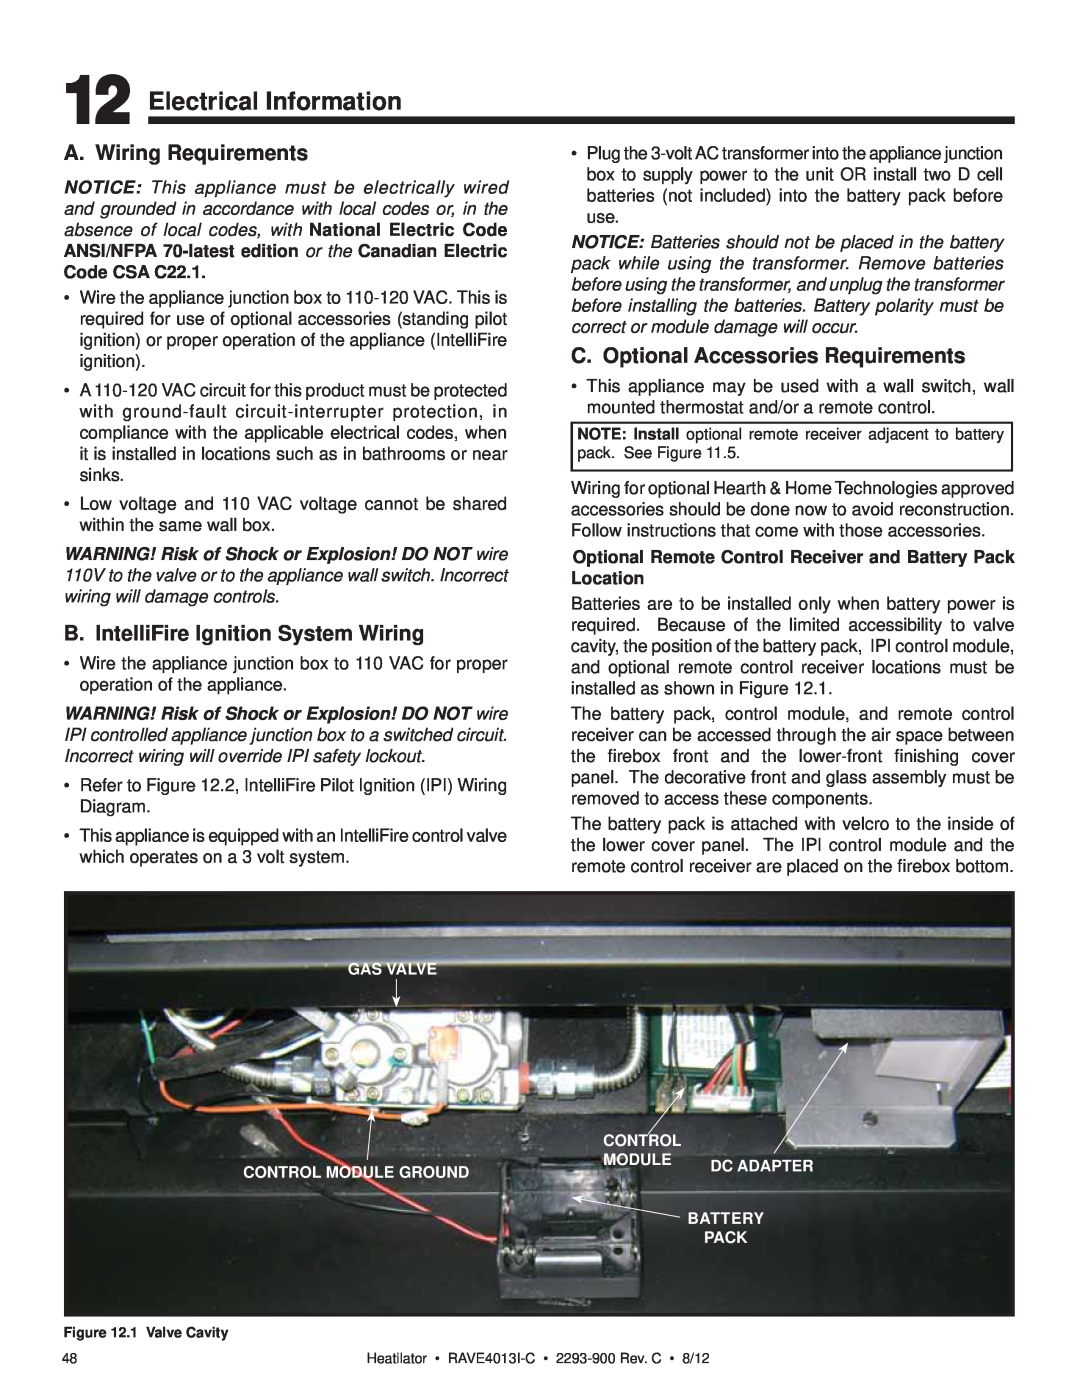 Heatiator Rave4013i-c owner manual Electrical Information, A. Wiring Requirements, B. IntelliFire Ignition System Wiring 